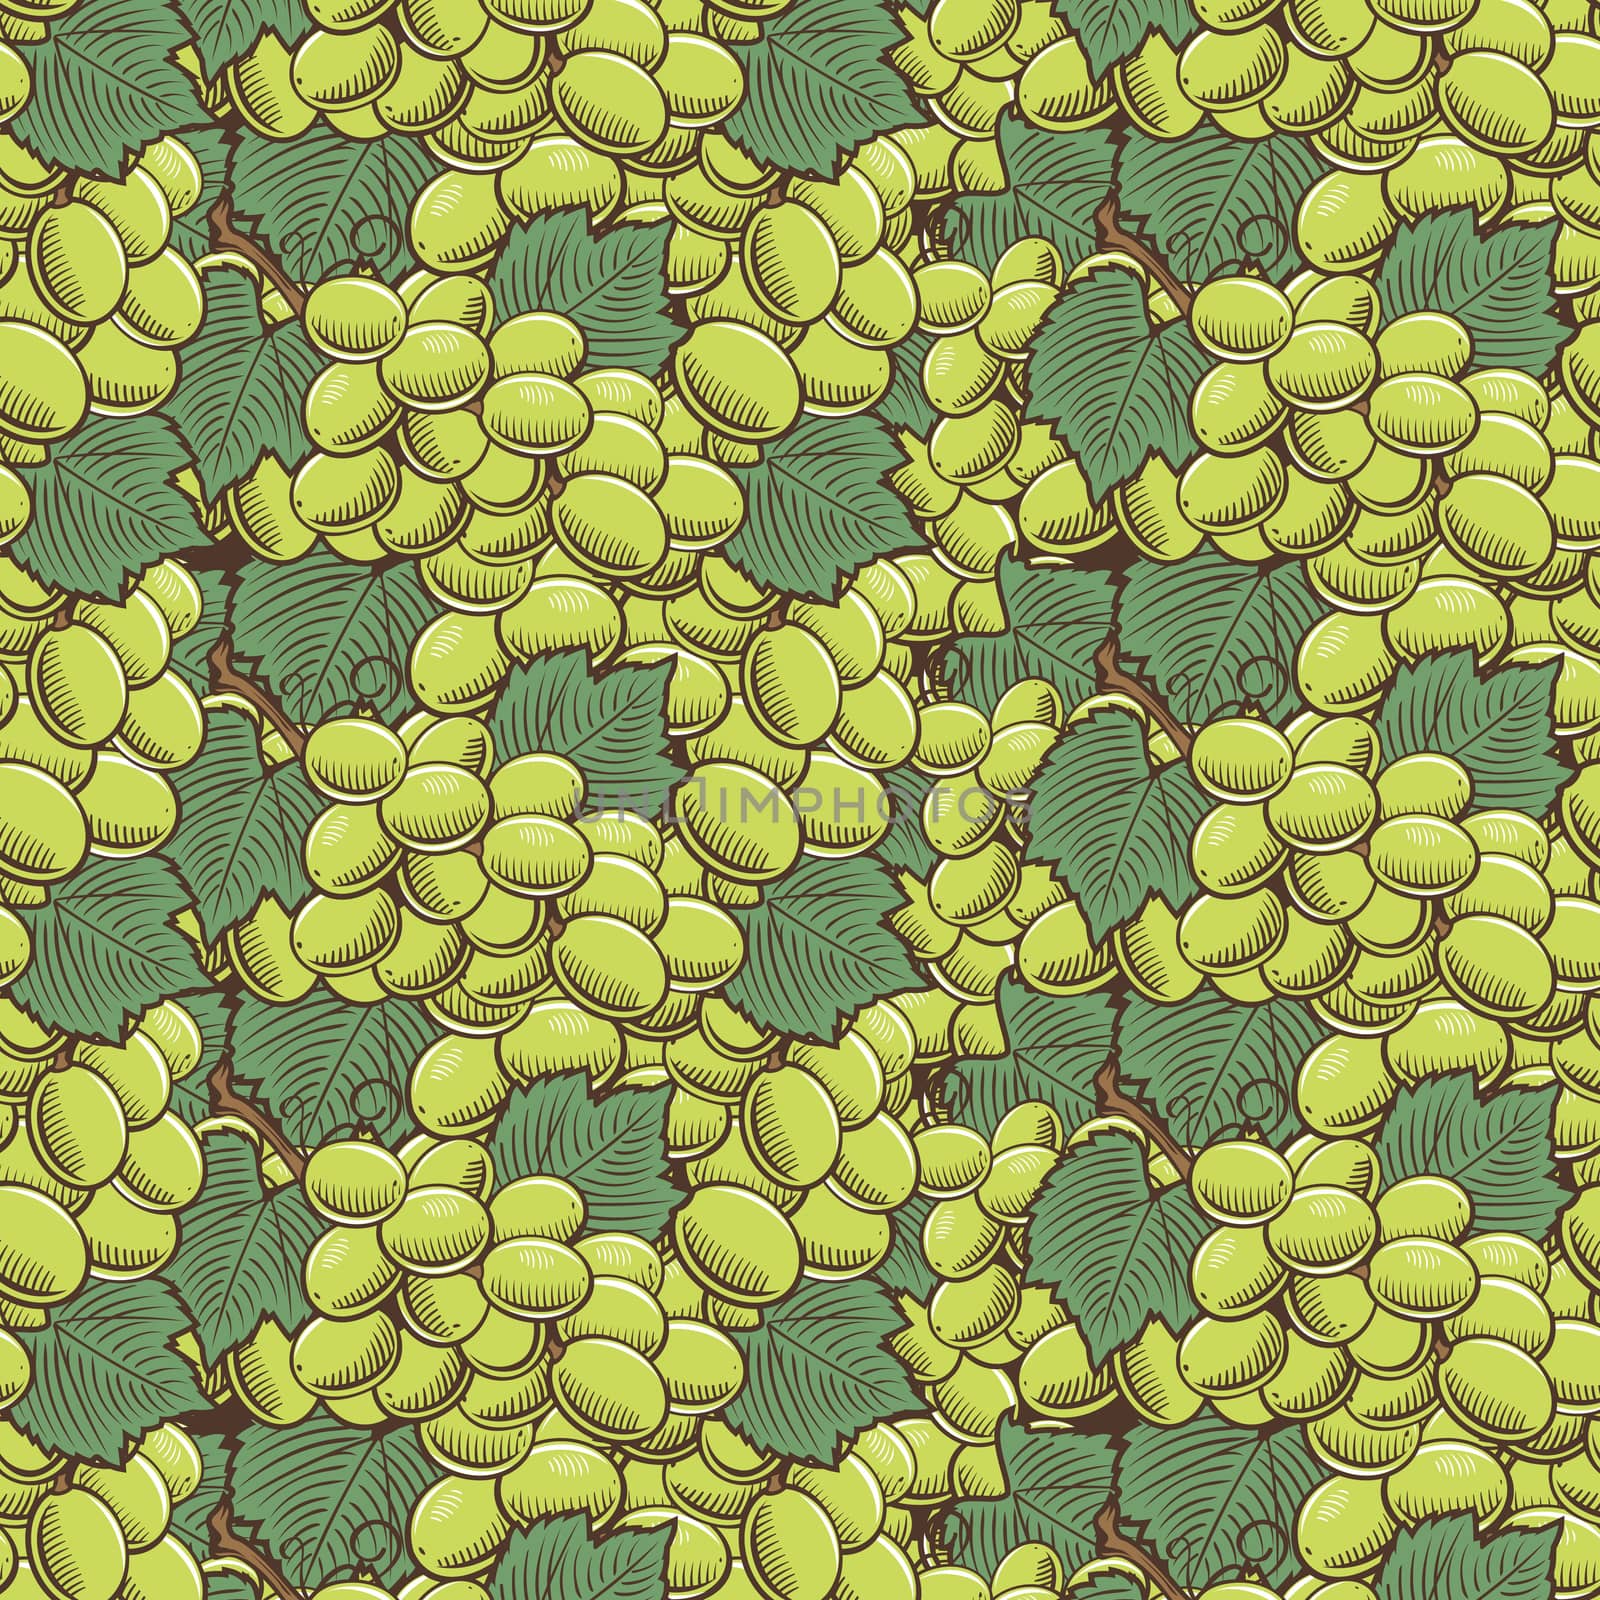 Vintage Green Grapes Seamless Pattern by ConceptCafe